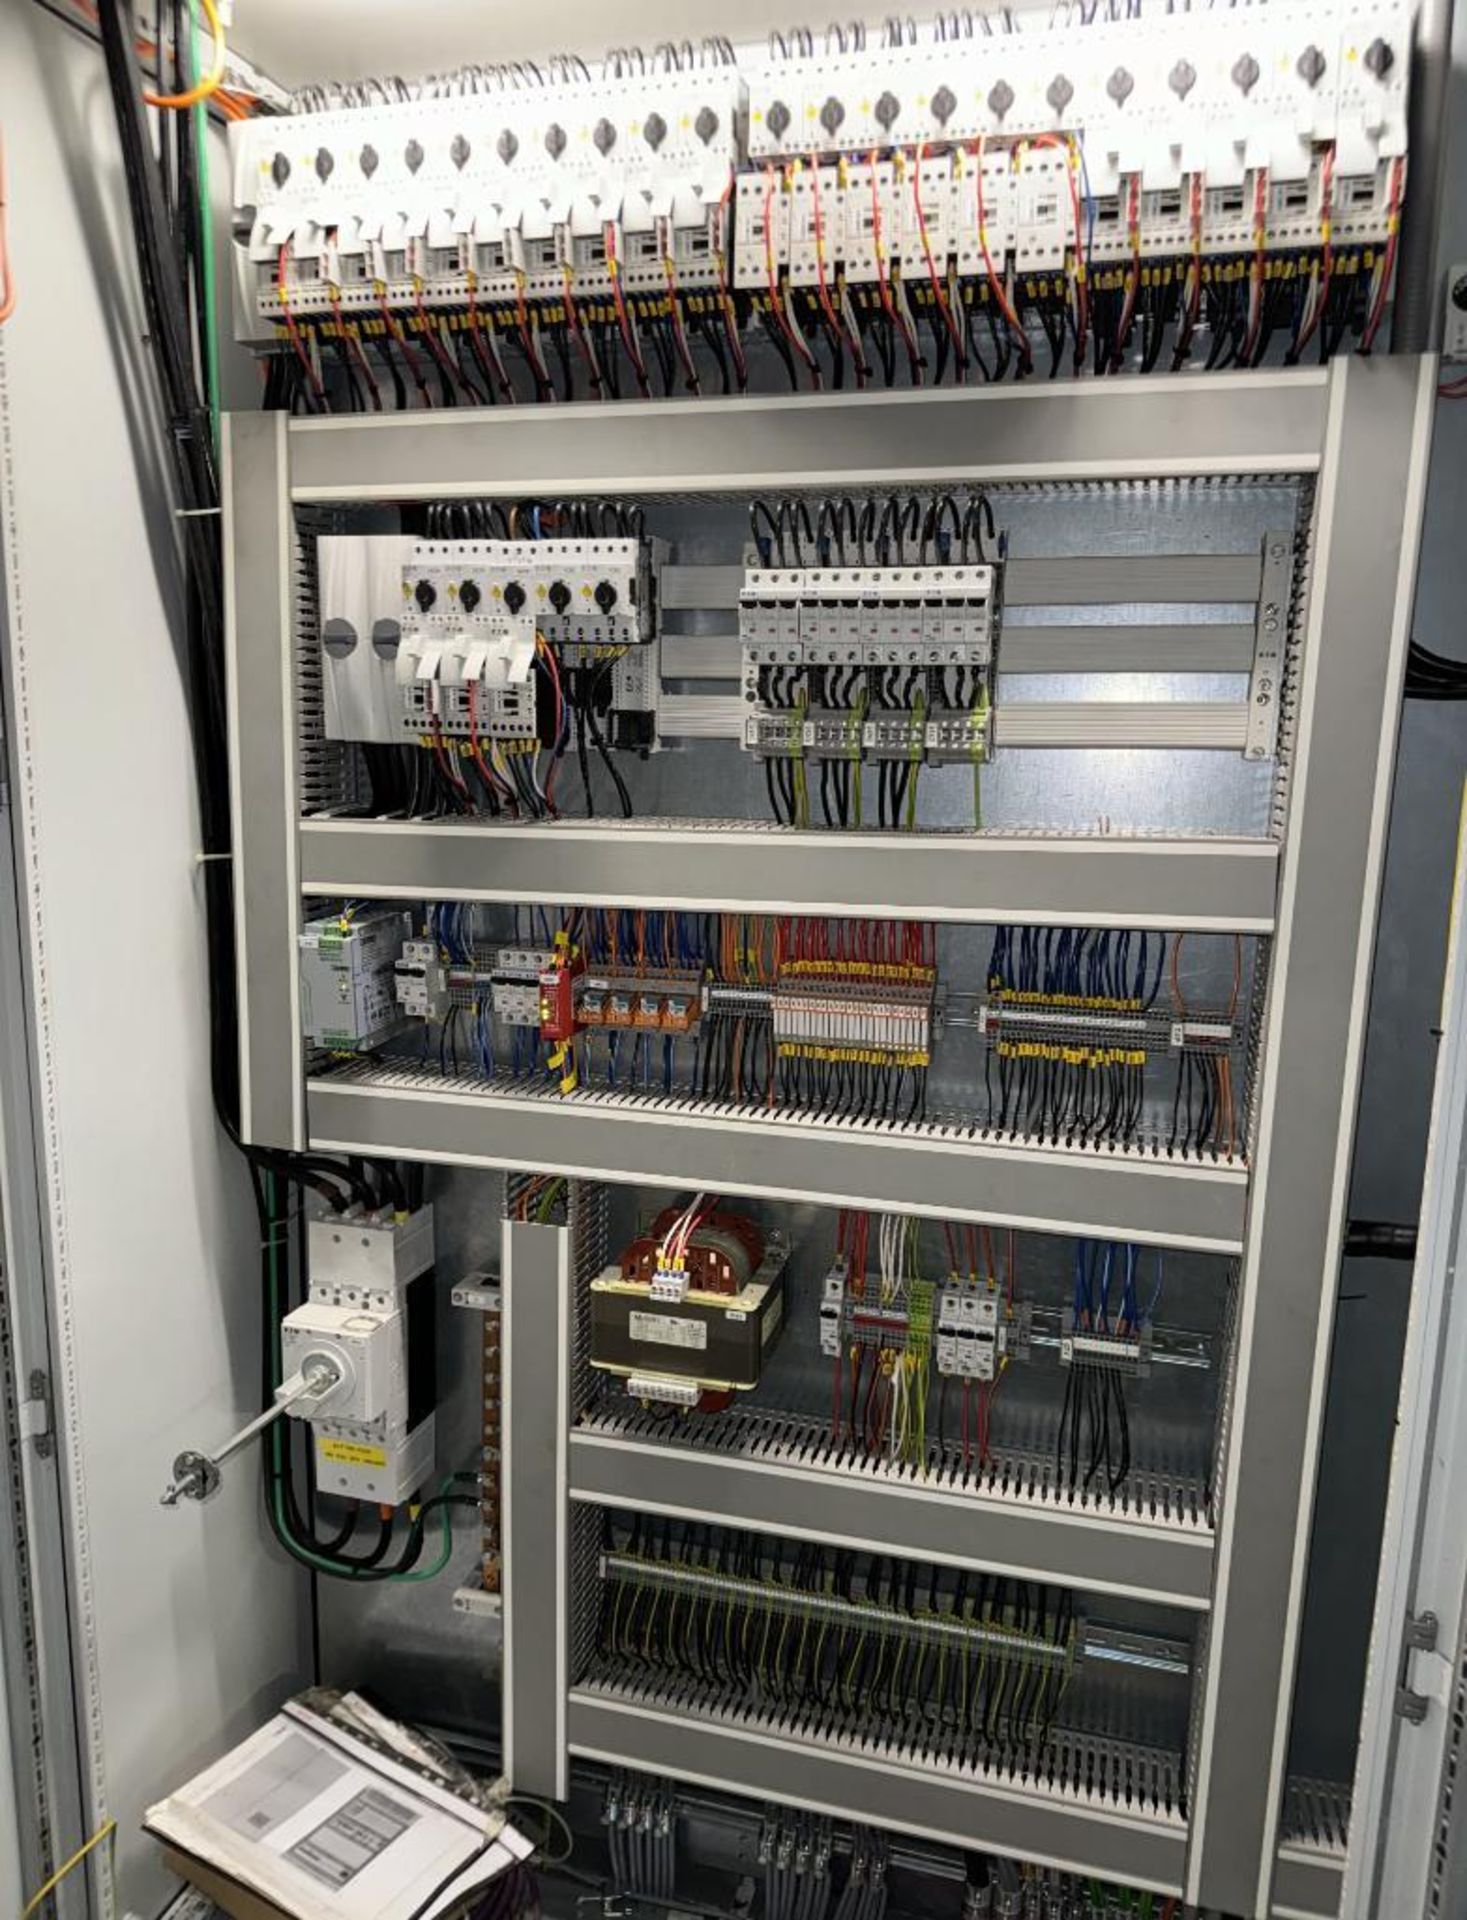 Lot Of (3) Control Panels. With Siemens Simatic HMI Touch Panel, Siemens PLC's, Eaton drives, misc. - Image 11 of 35